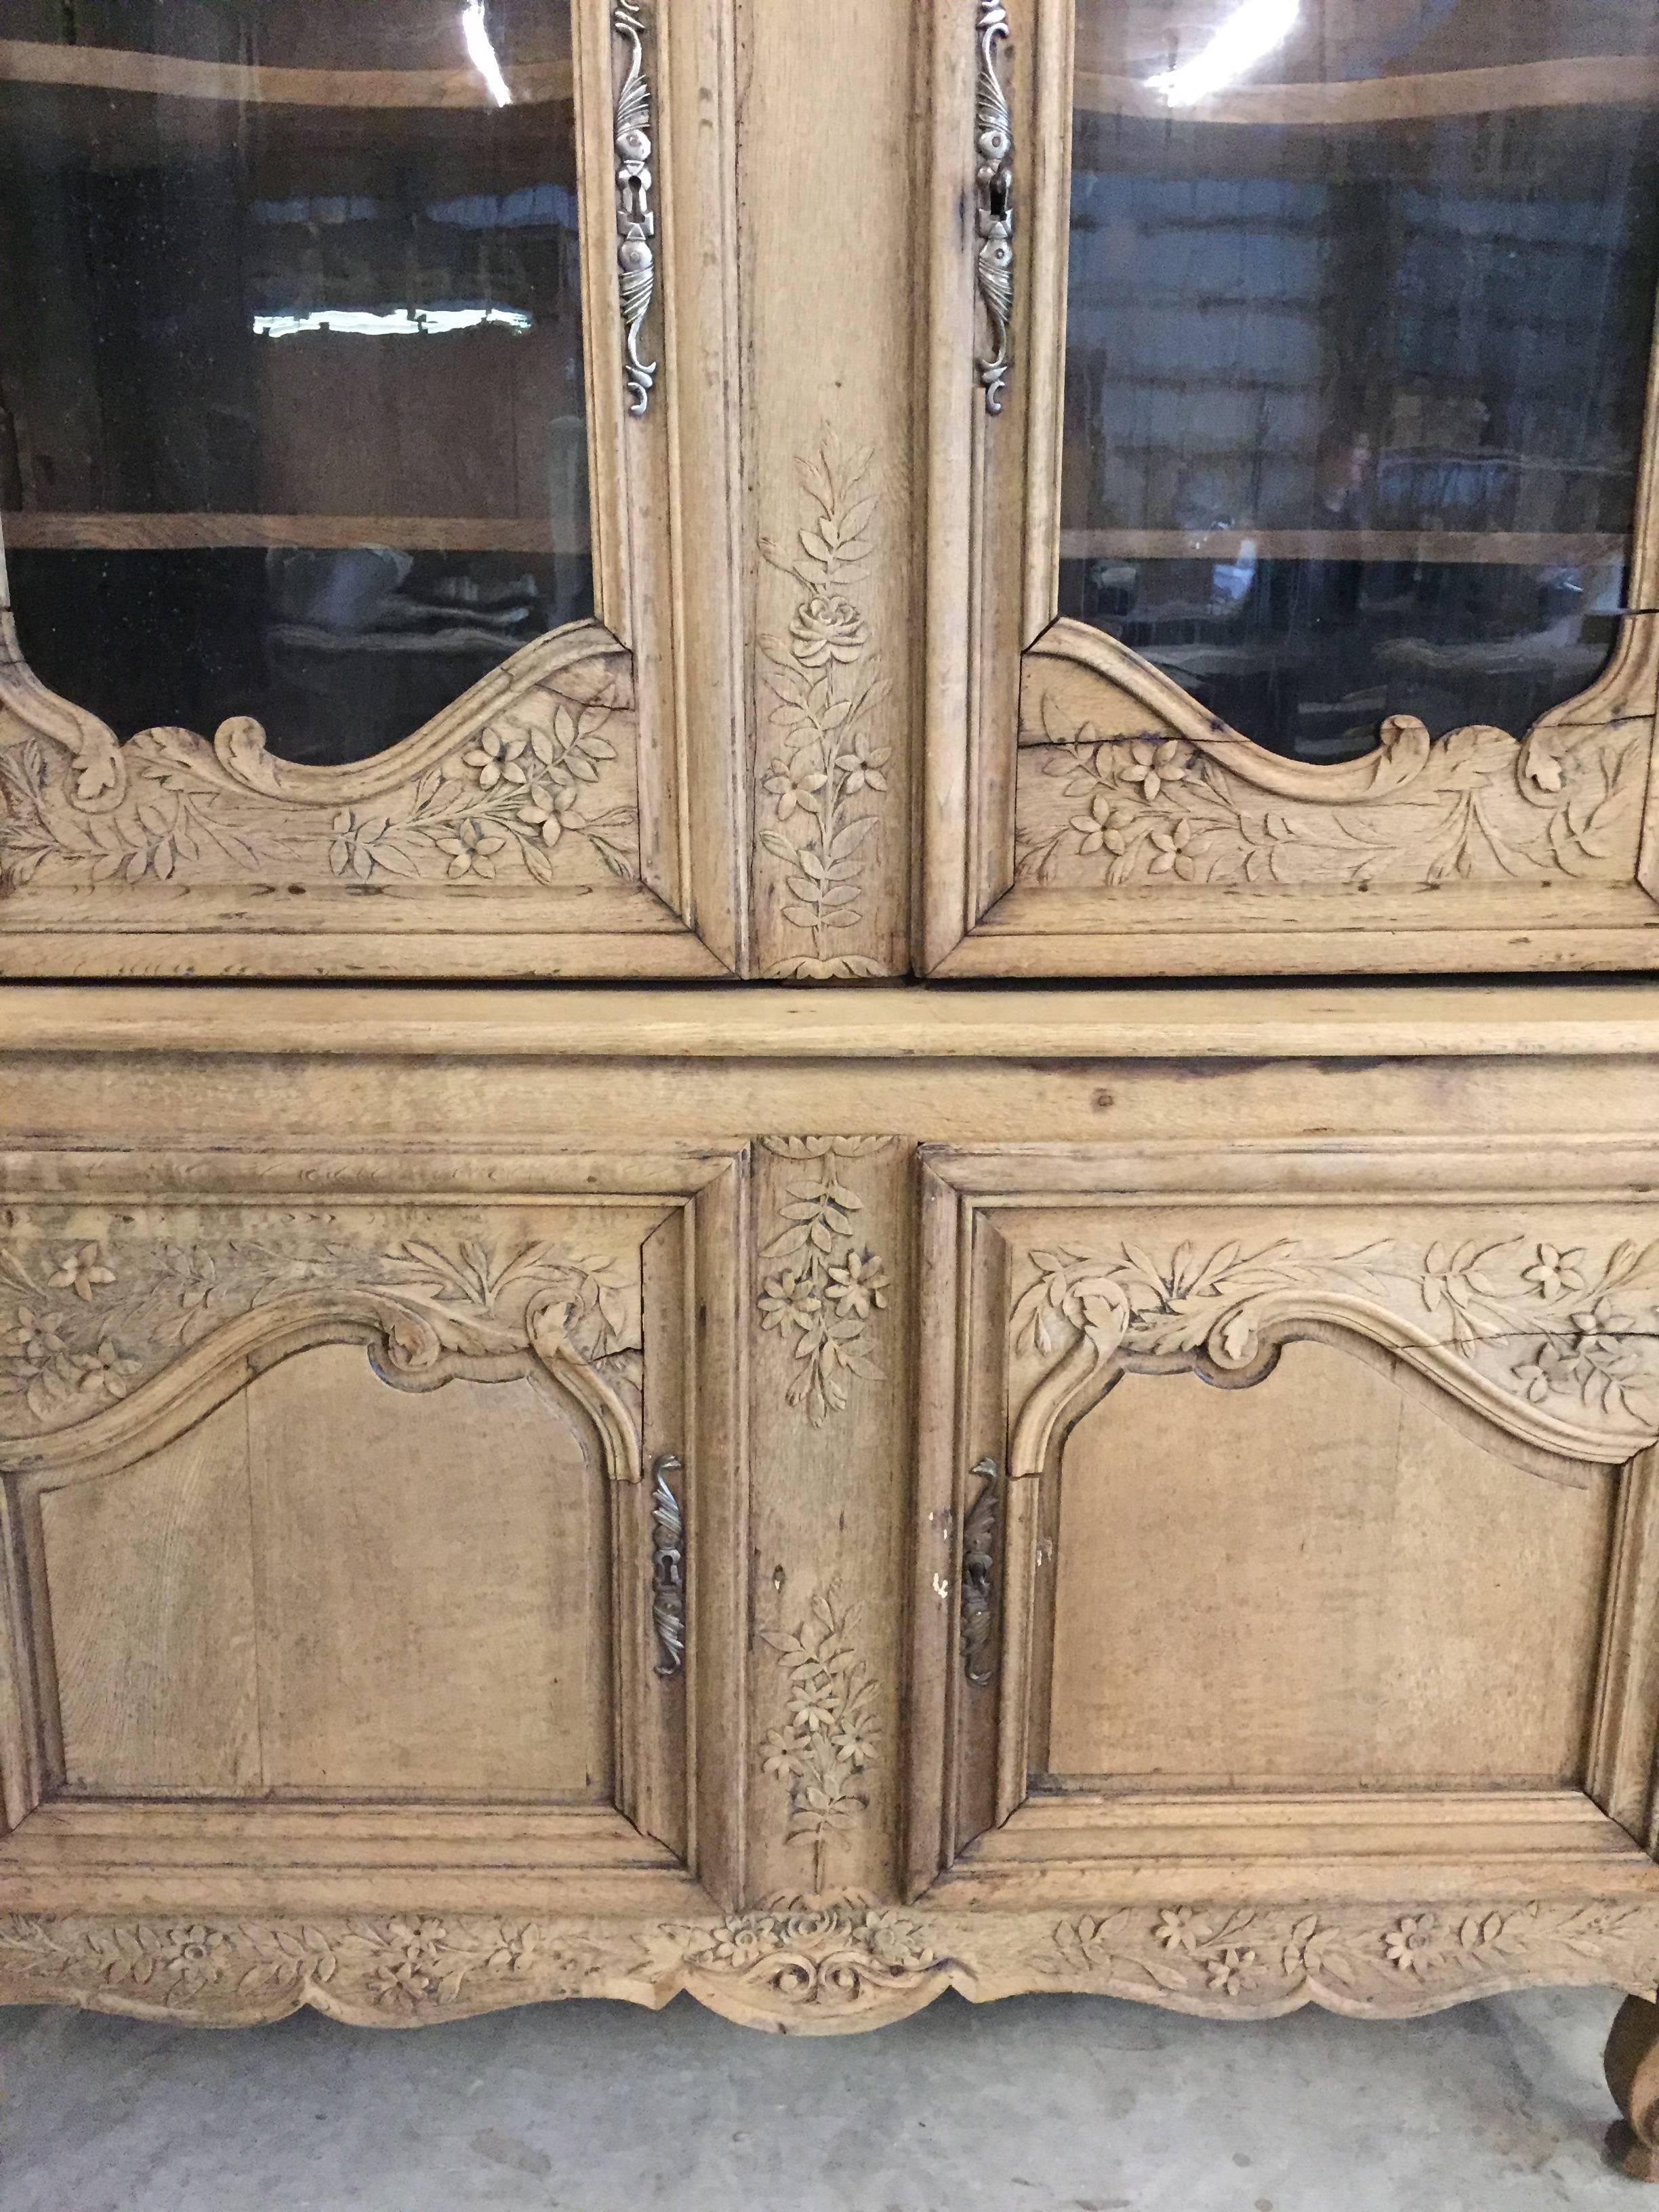 French 1+9th century bleached two part buffet deux corps with an upper cabinet of glass doors over a lower cabinet with two cutlery drawers and shelves inside.  Beautiful hand carved details and scalloped upper shelves.  